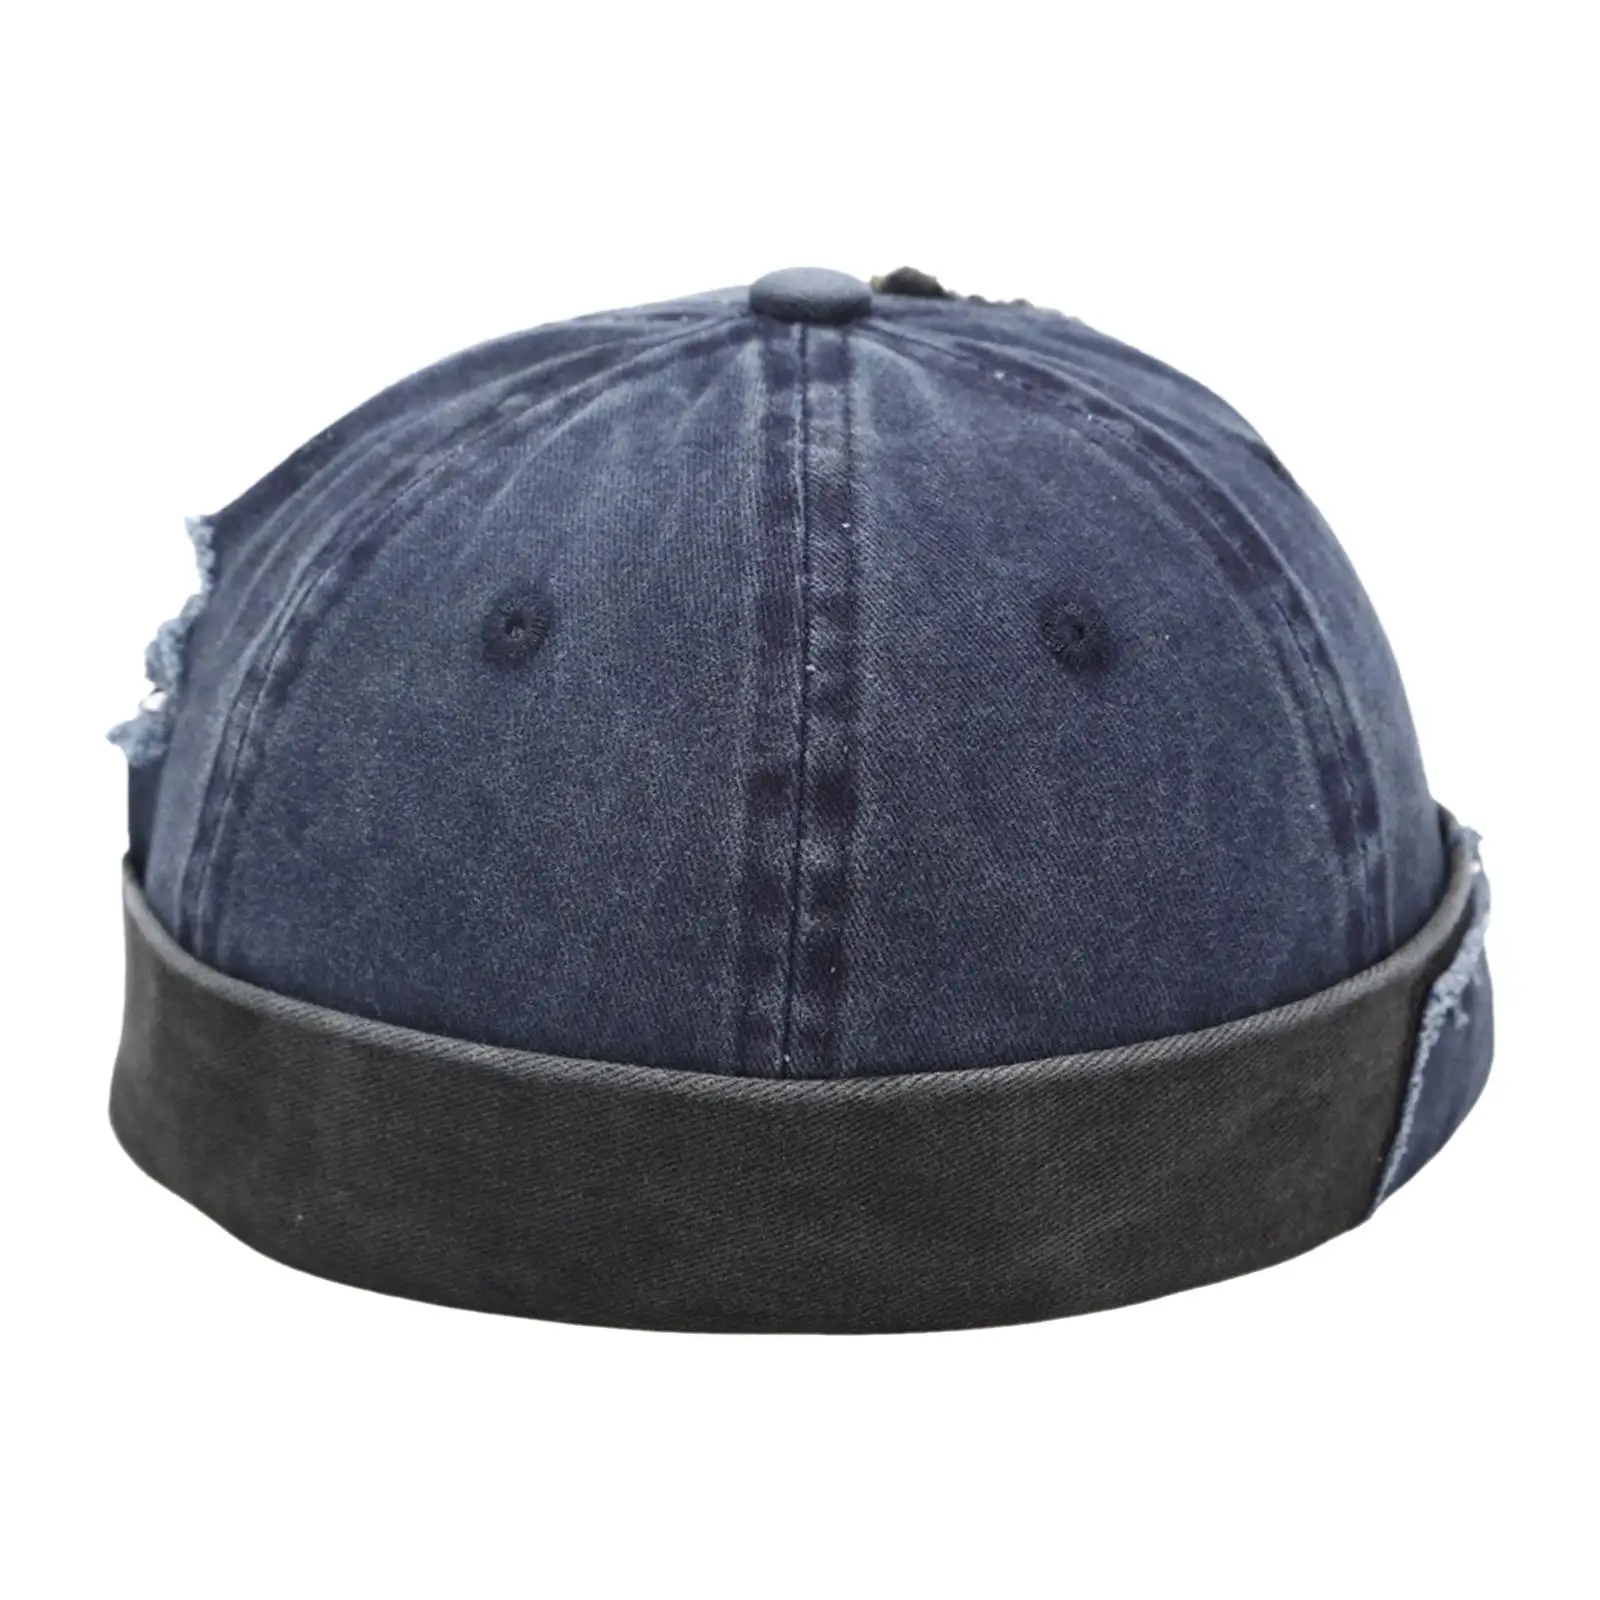 Brimless Hat Street Style Skull Caps Adjustable Casual for Worker Sailor Fisherman